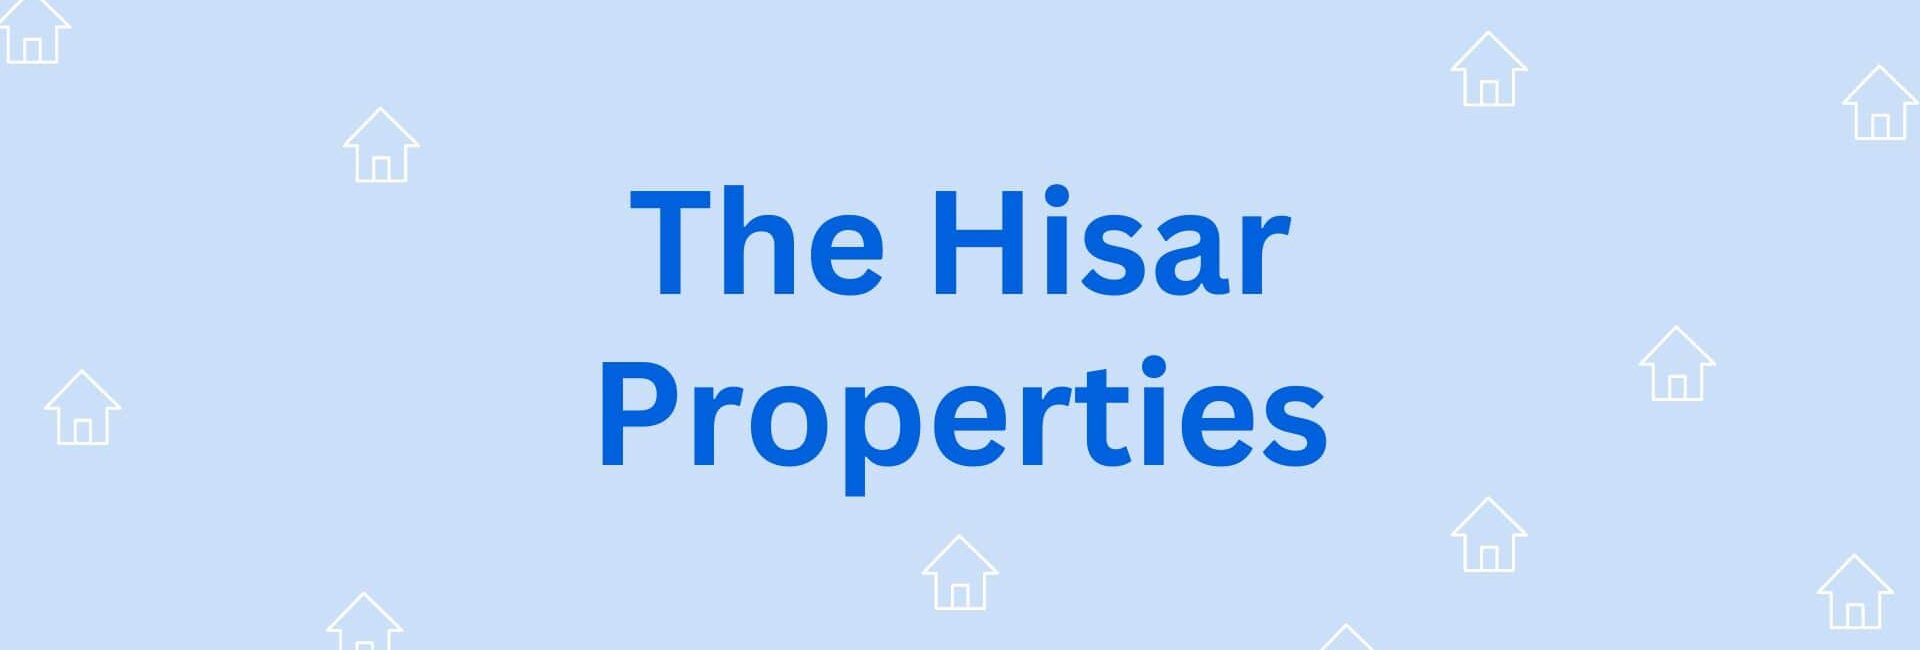 The Hisar Properties - Real Estate Agent in Hisar